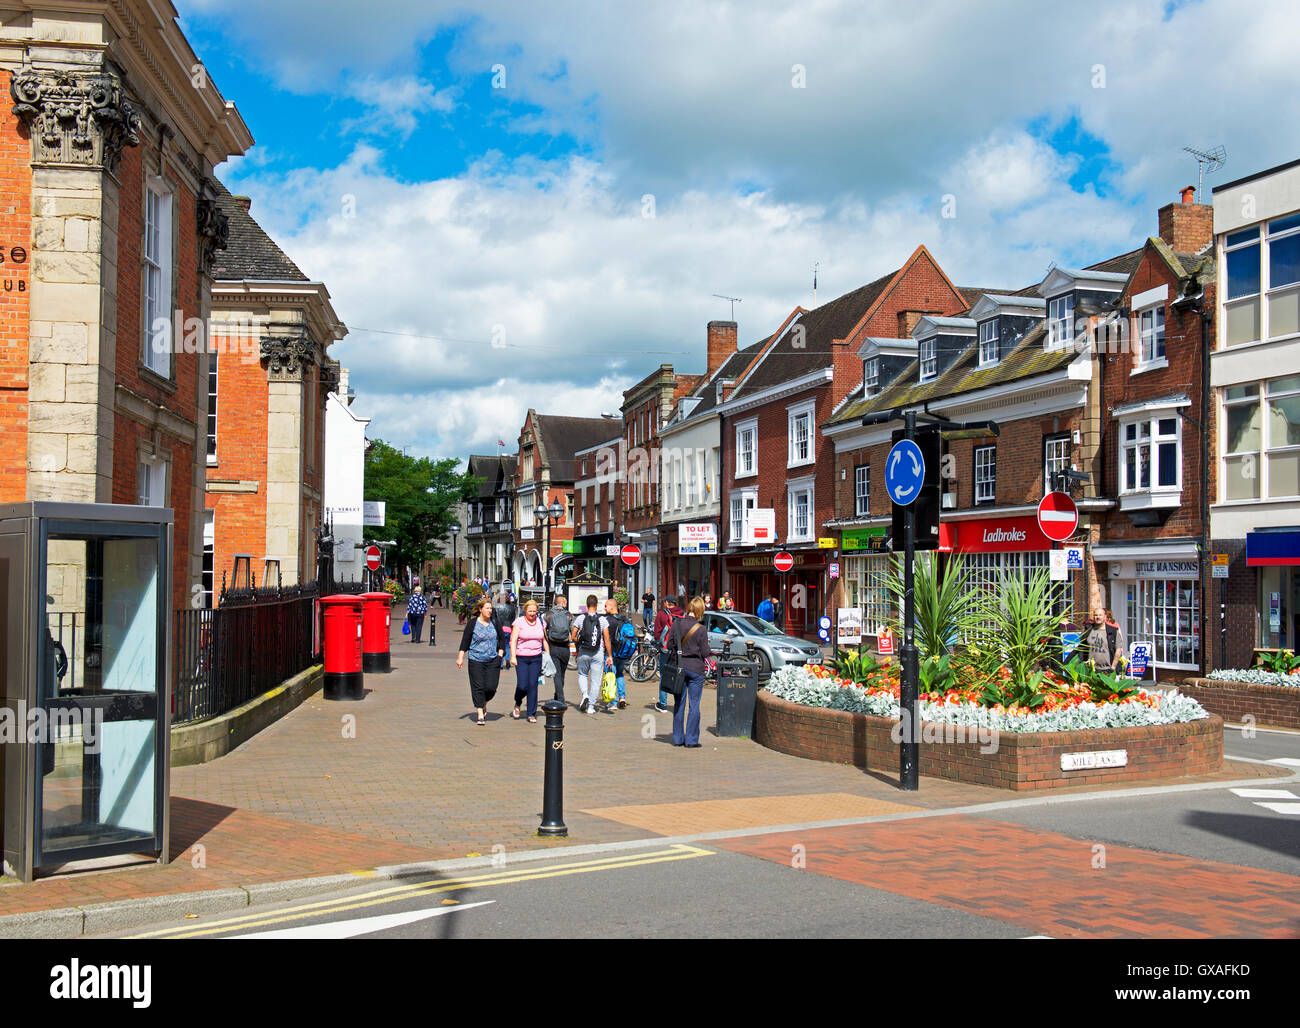 Shopping street in Stafford, Staffordshire, England UK Stock Photo